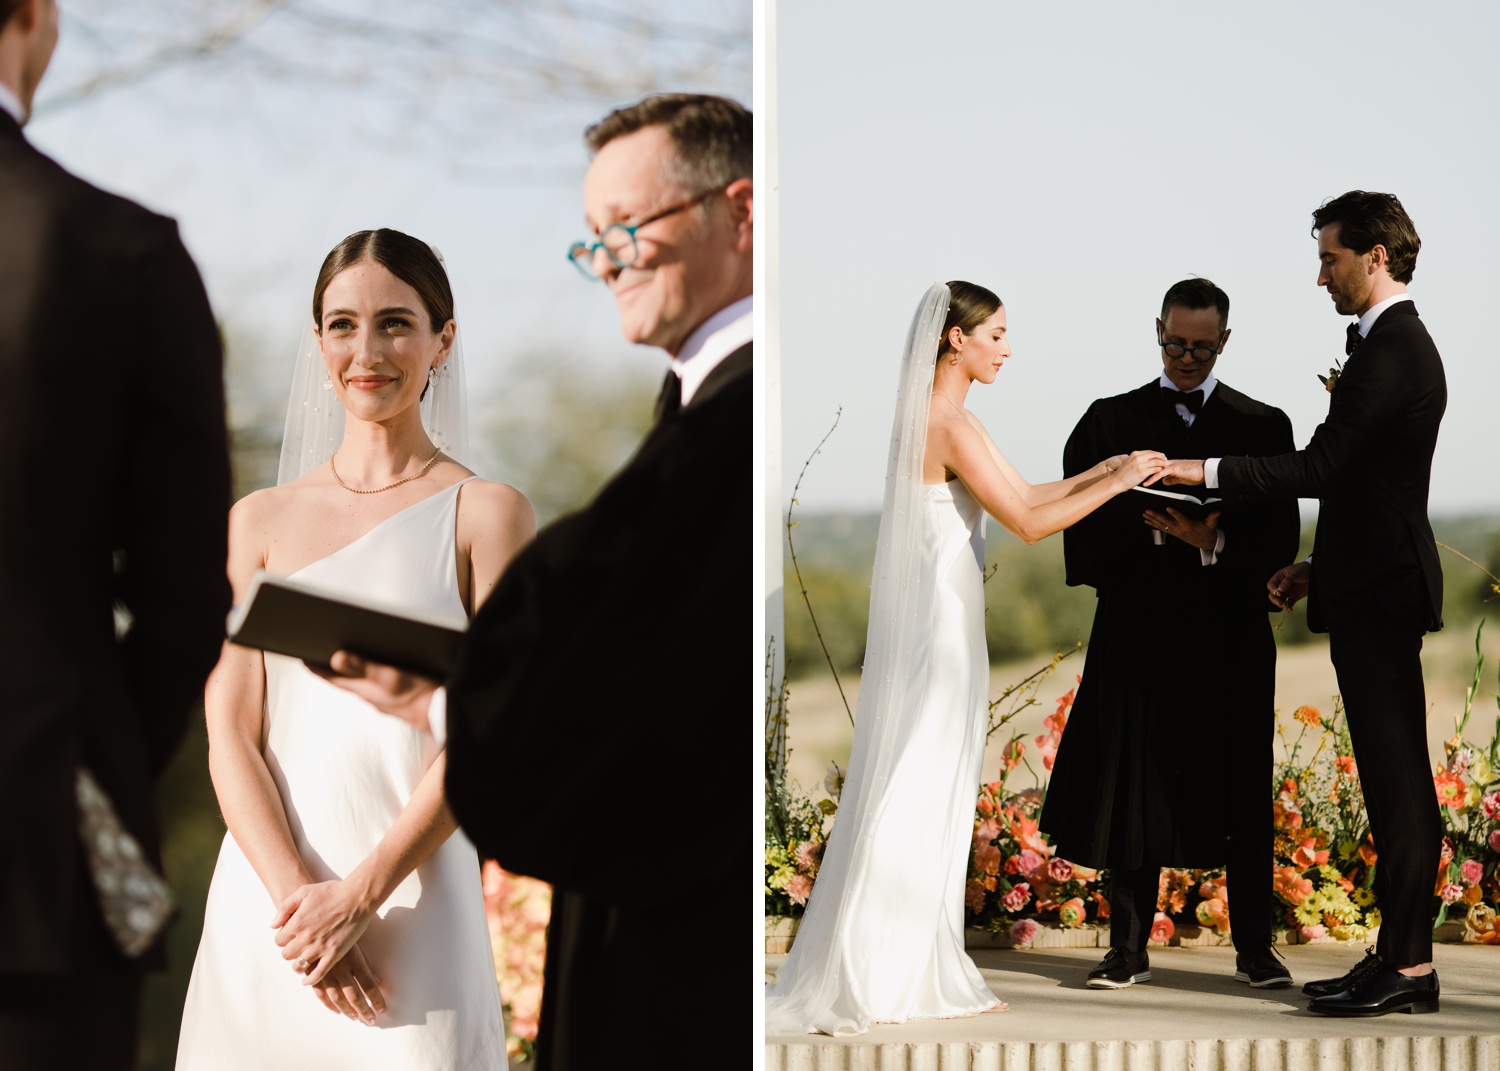 Outdoor wedding ceremony at Prospect House